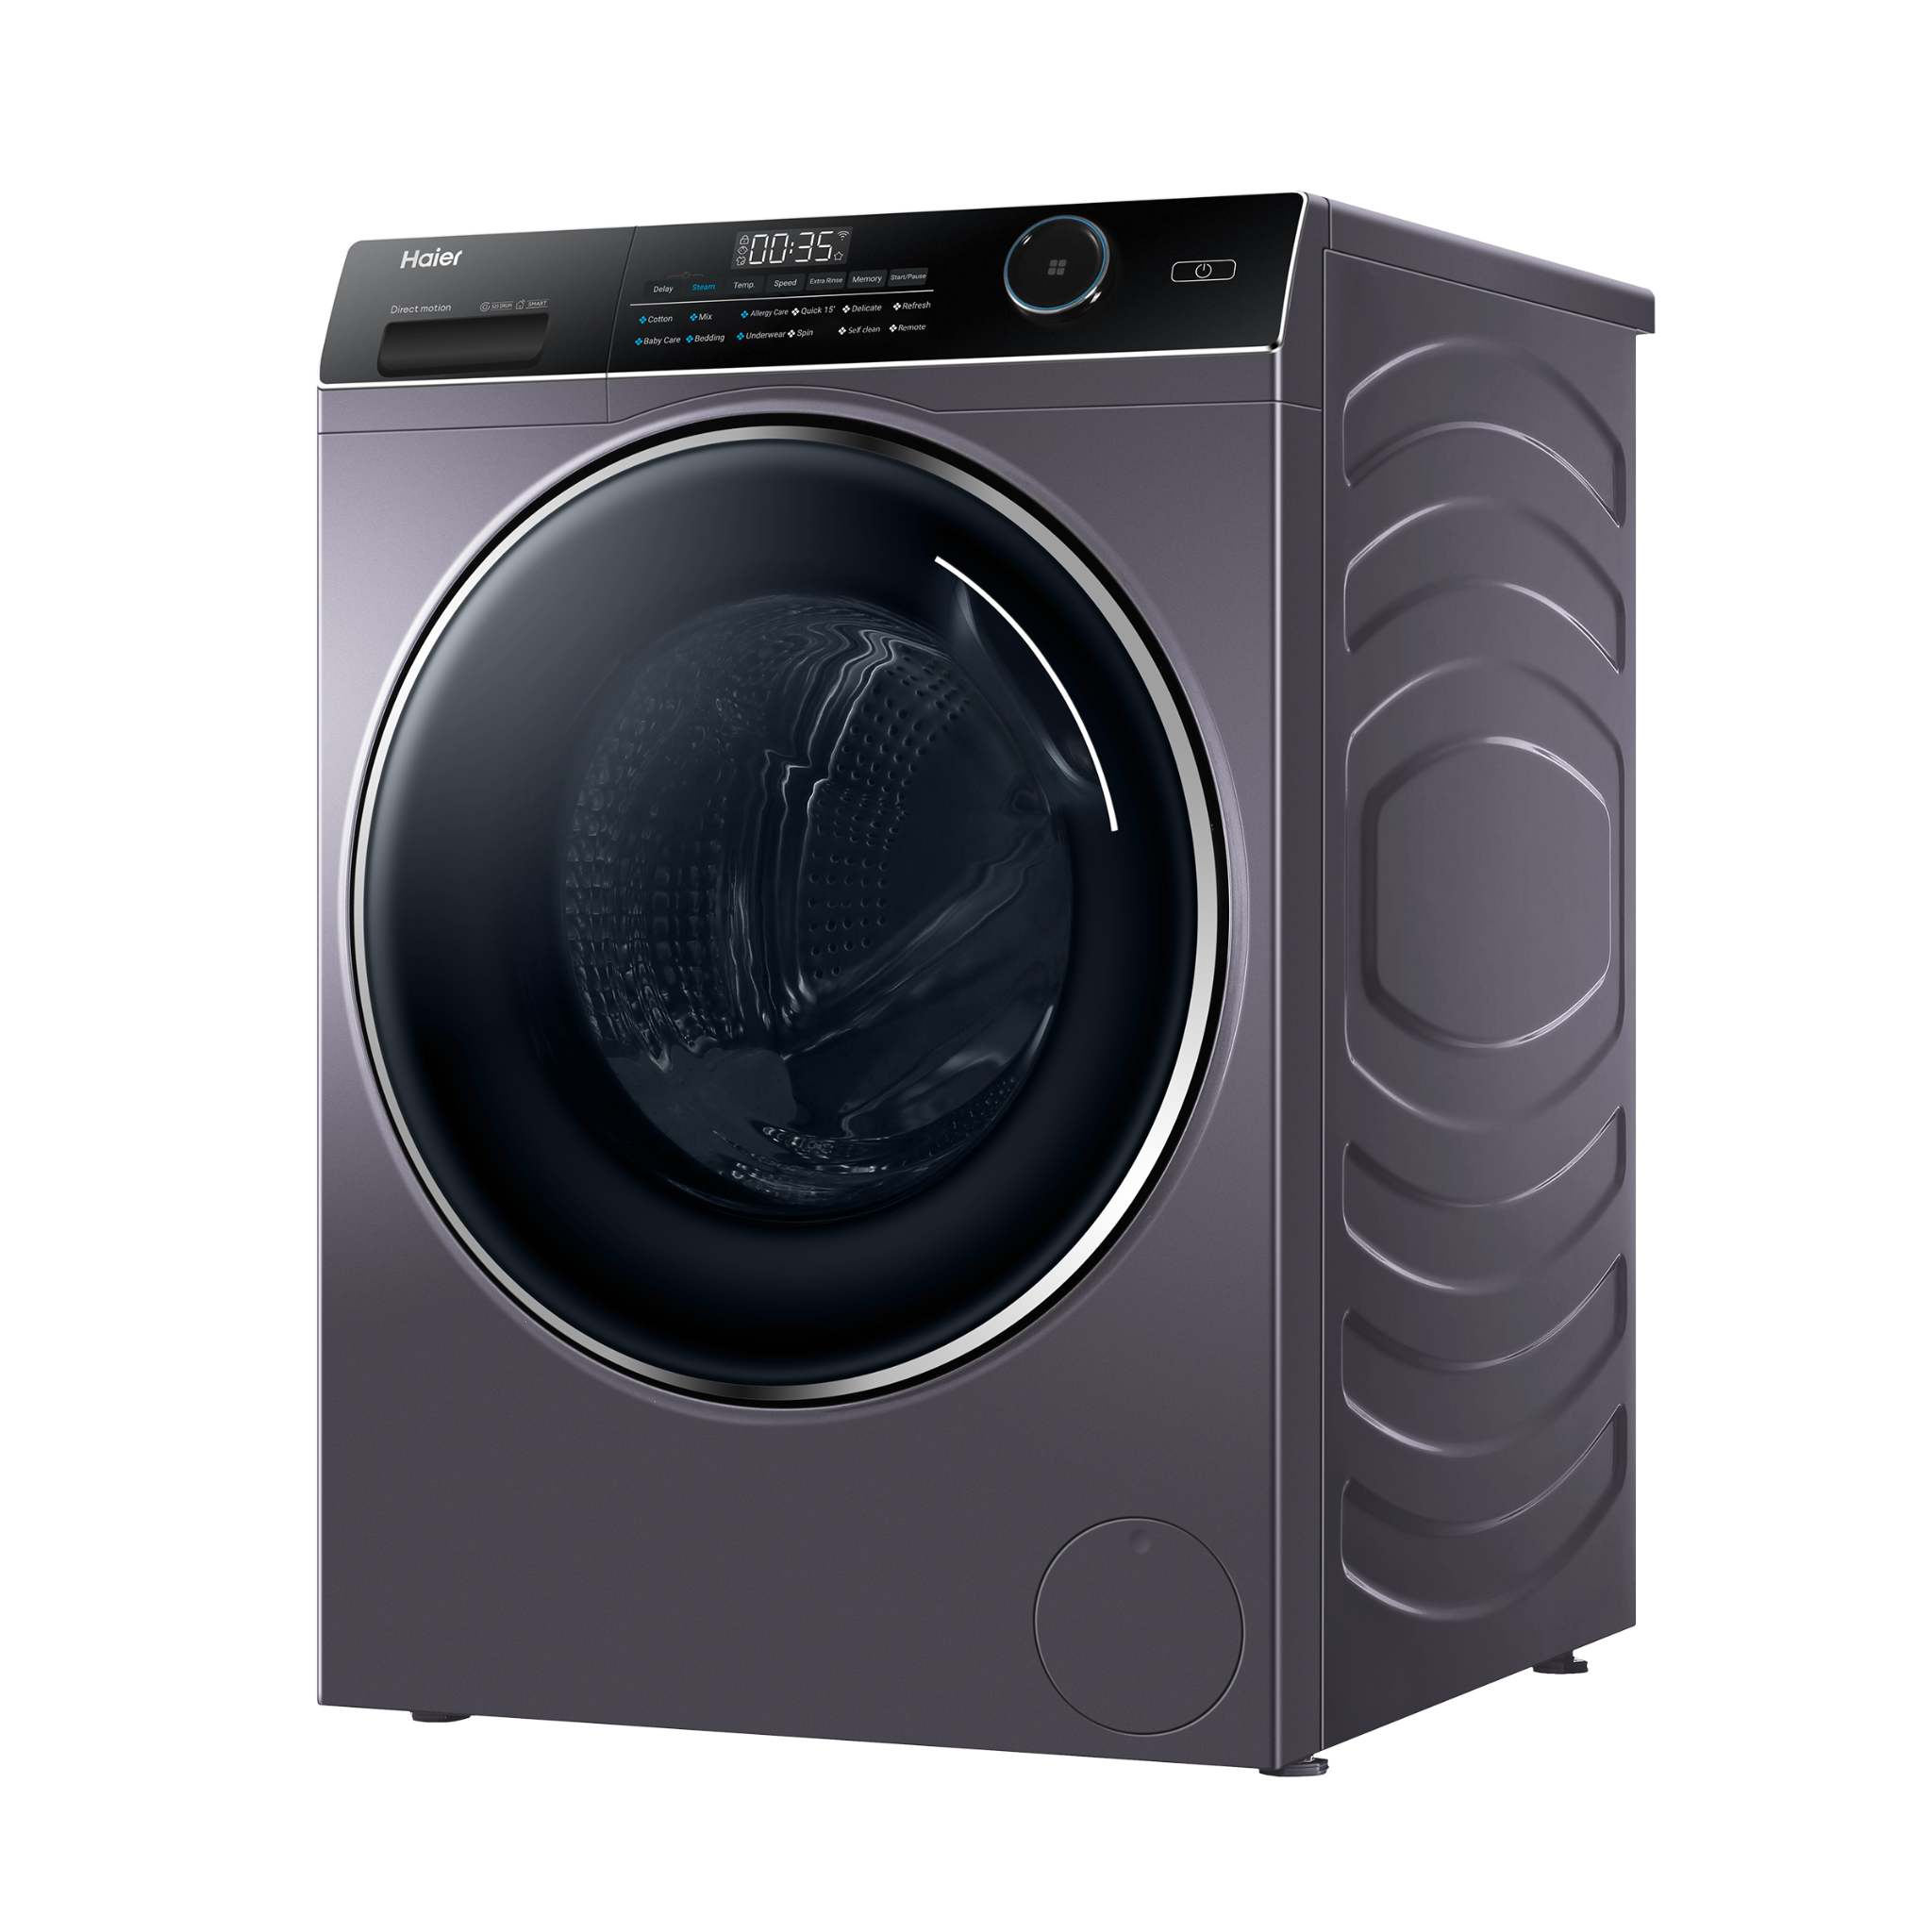 Haier 10kg Front Loading Inverter Washing Machine With Anti Bacterial Treatment Hw100-Bp14959s6 Front Load Mesin Basuh - 10 Haier Washing Machines - ShopJourney